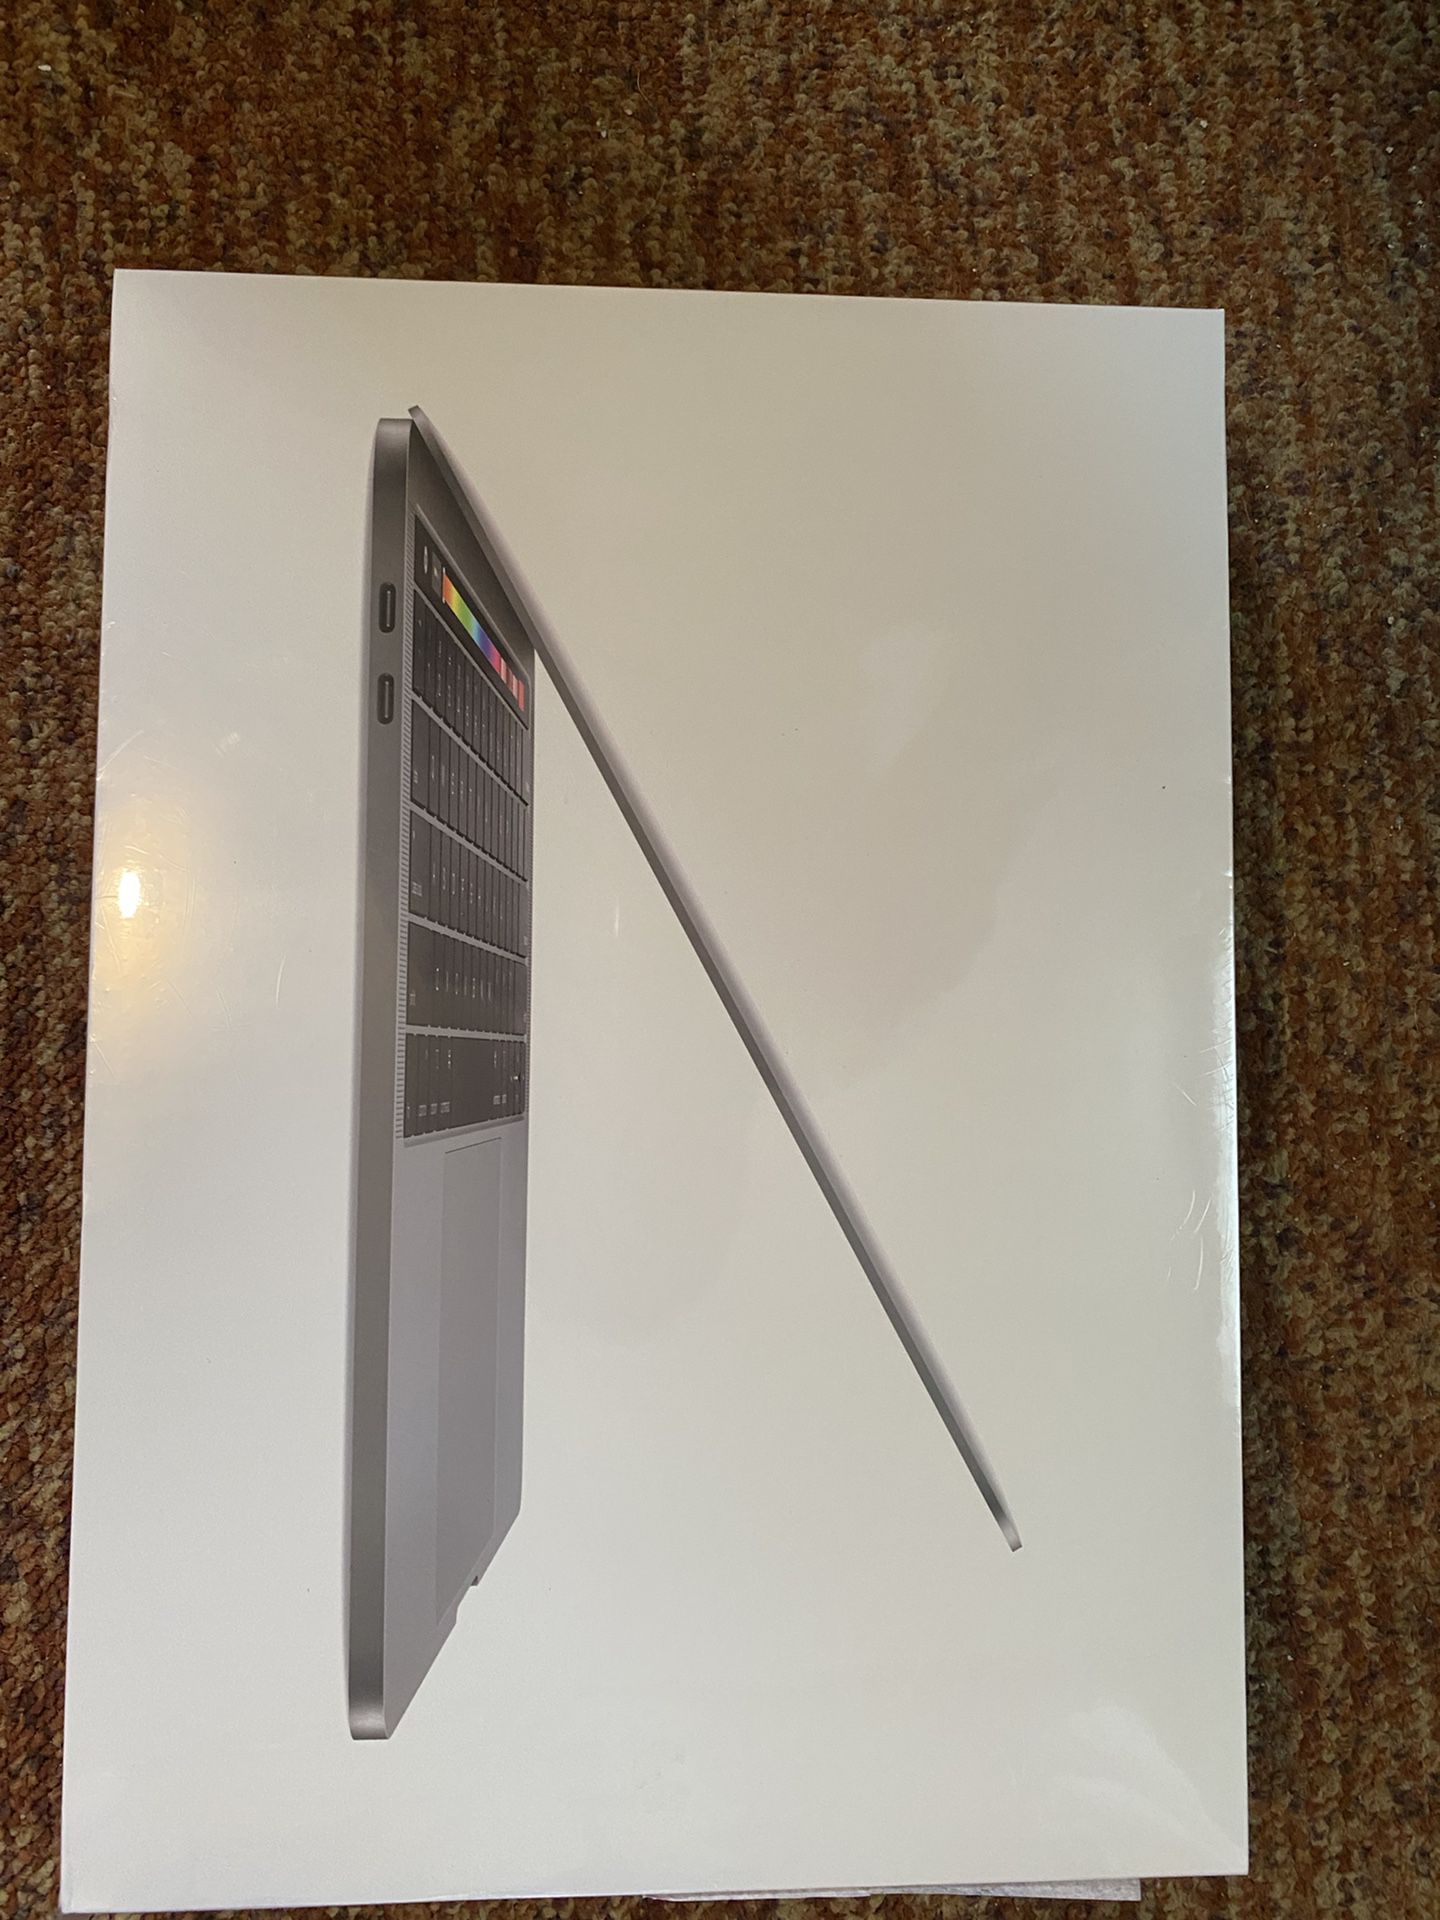 Apple - MacBook Pro - 13" Display with Touch Bar - Intel Core i5 - 8GB Memory - 128GB SSD (Latest Model) - Space Gray